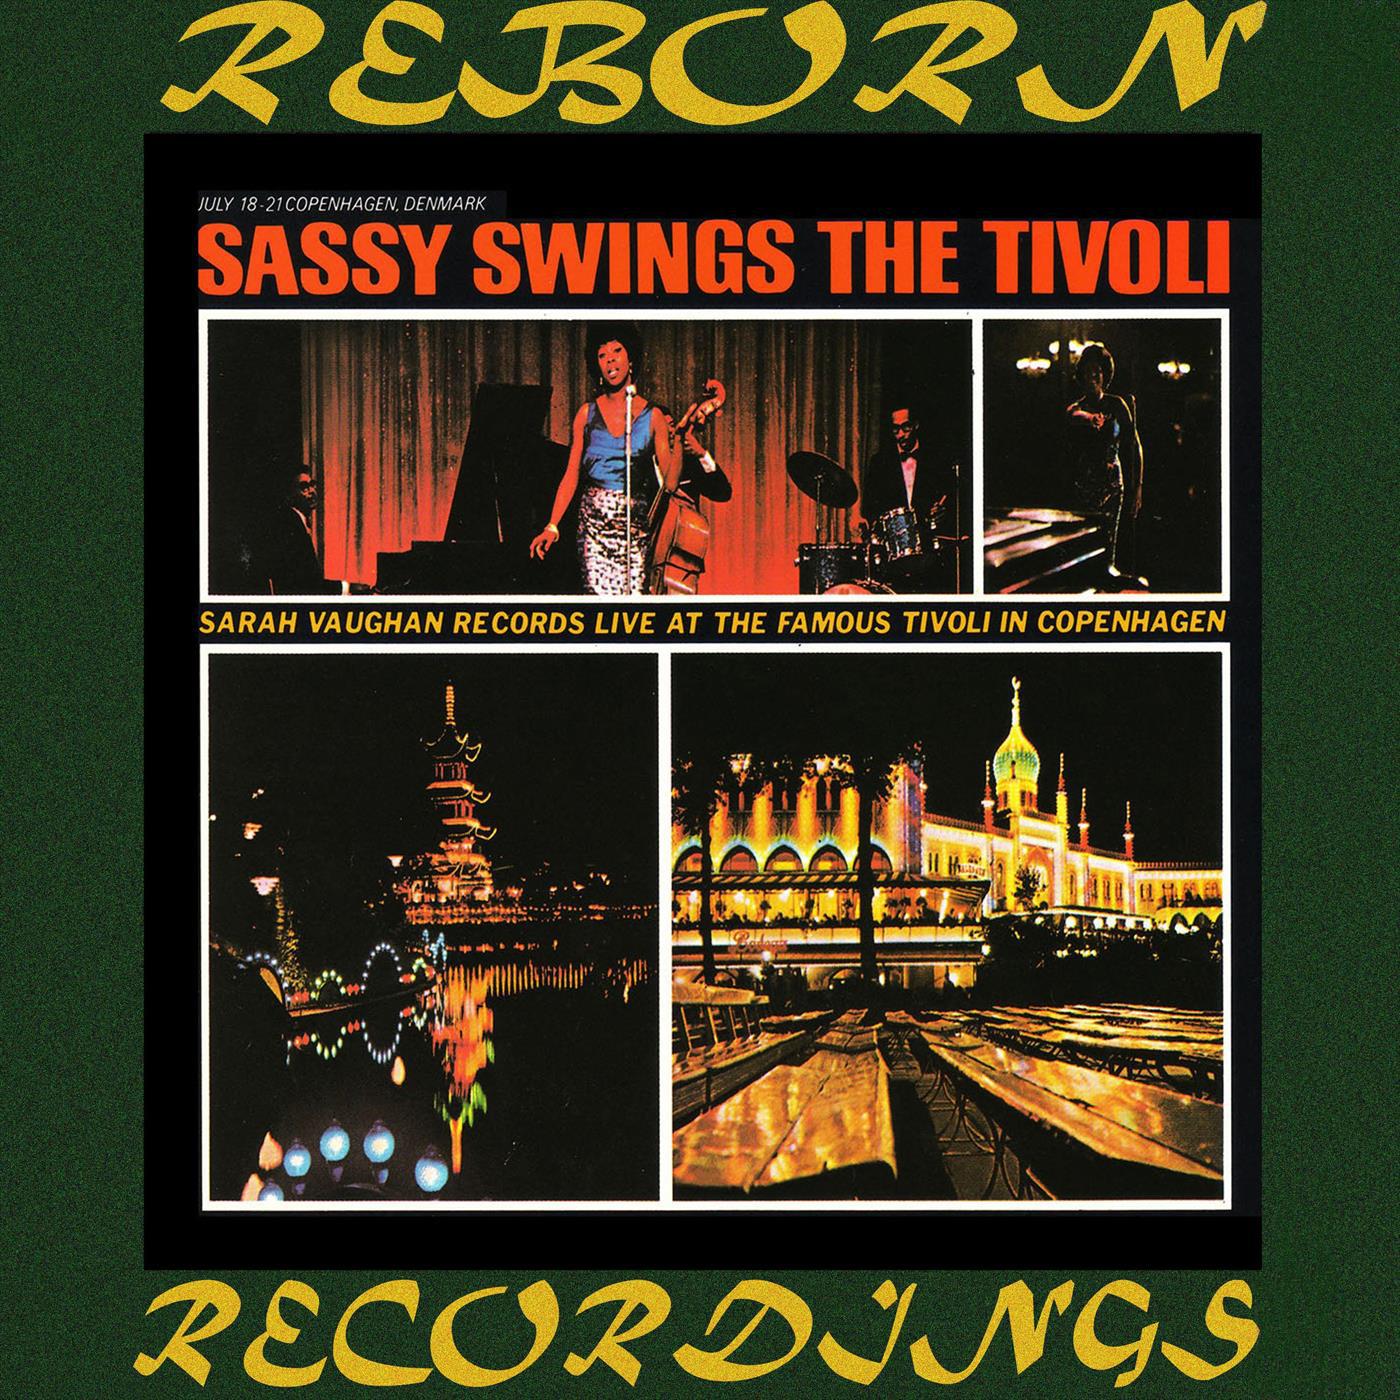 The Complete Recordings of Sassy Swings The Tivoli (HD Remastered)